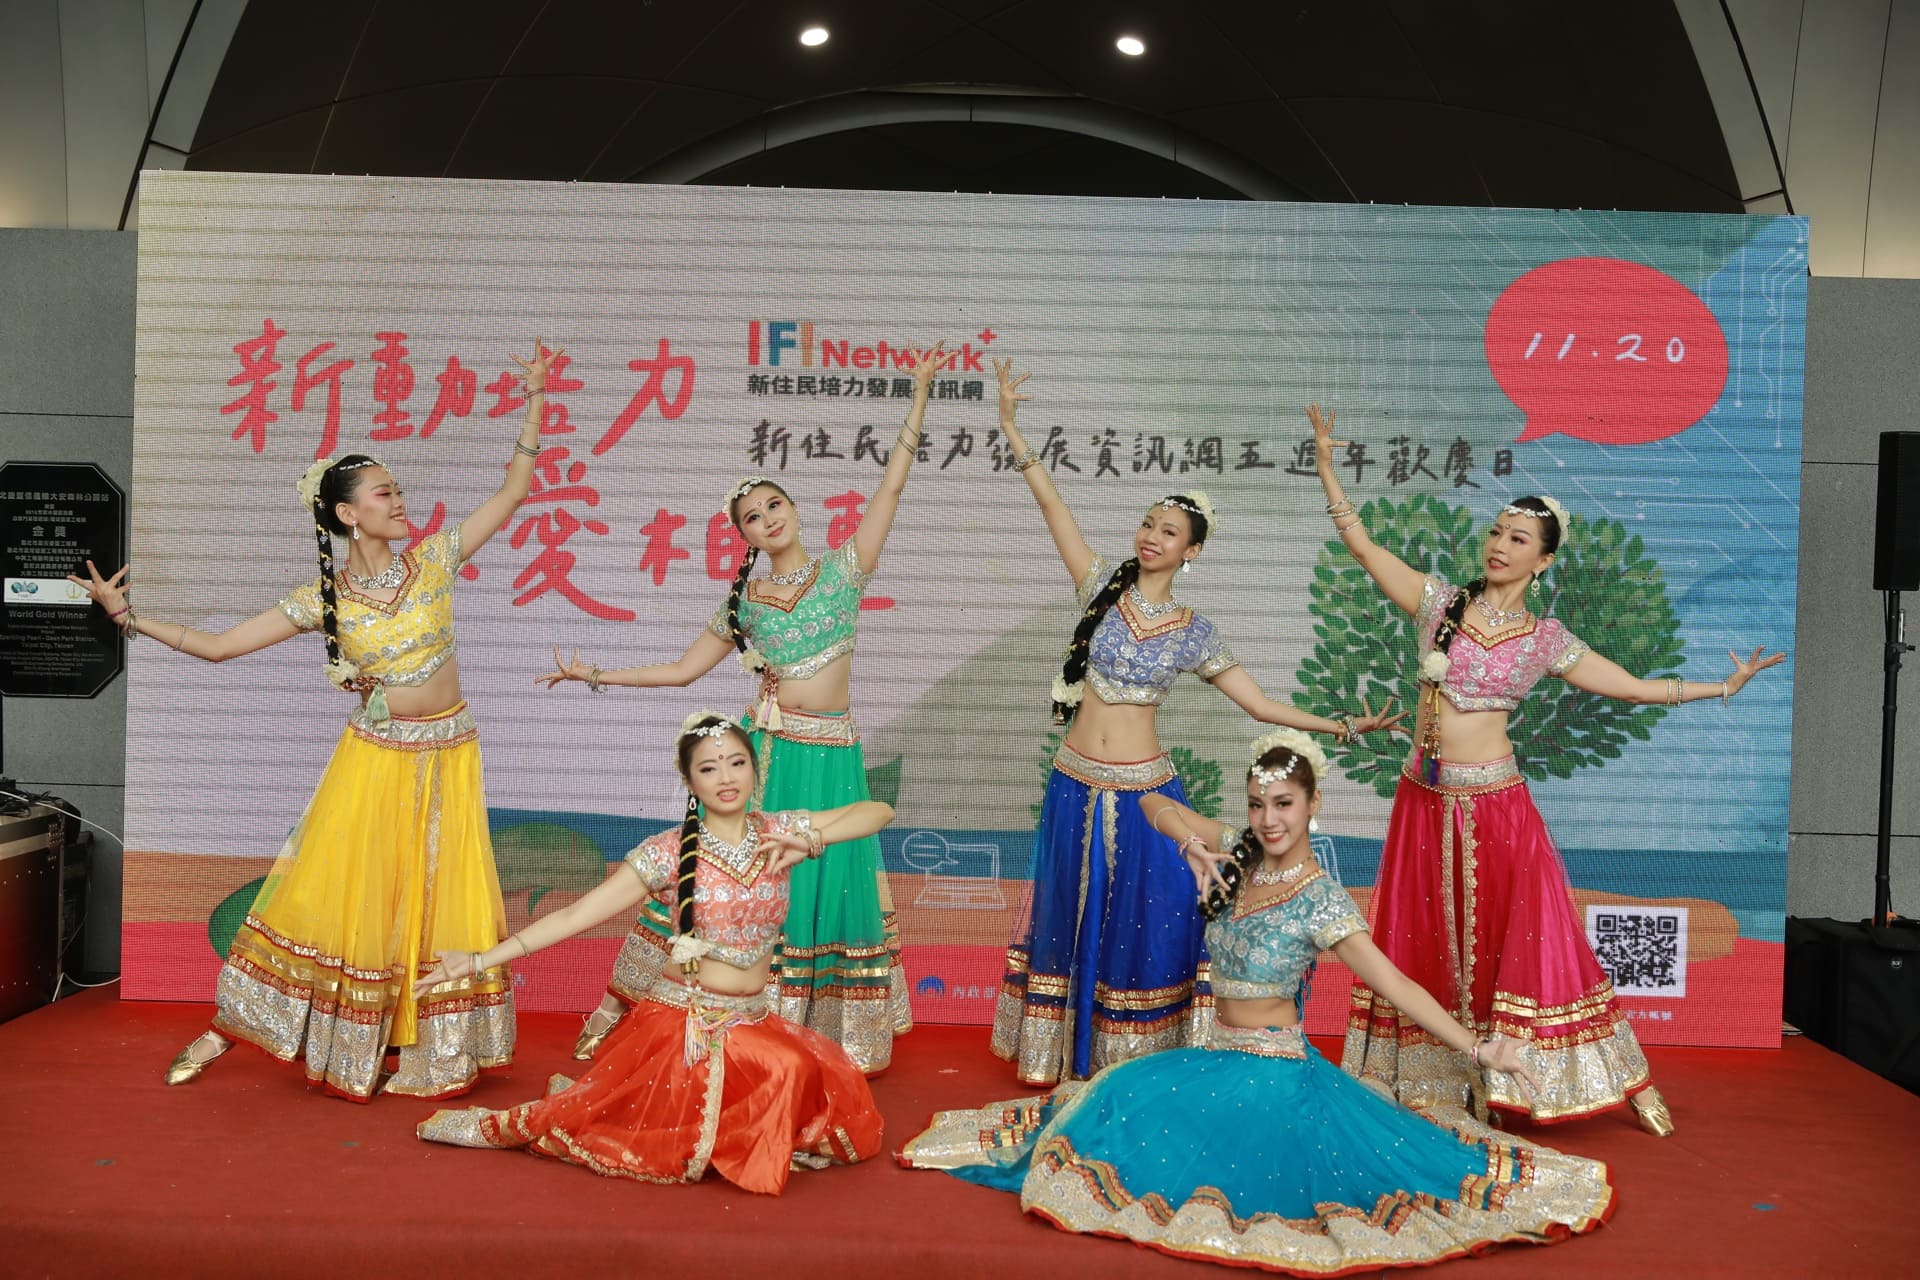 The event was unveiled by an exotic dance performance by 6 new immigrants of different nationalities. (Photo / Provided by the NIA)